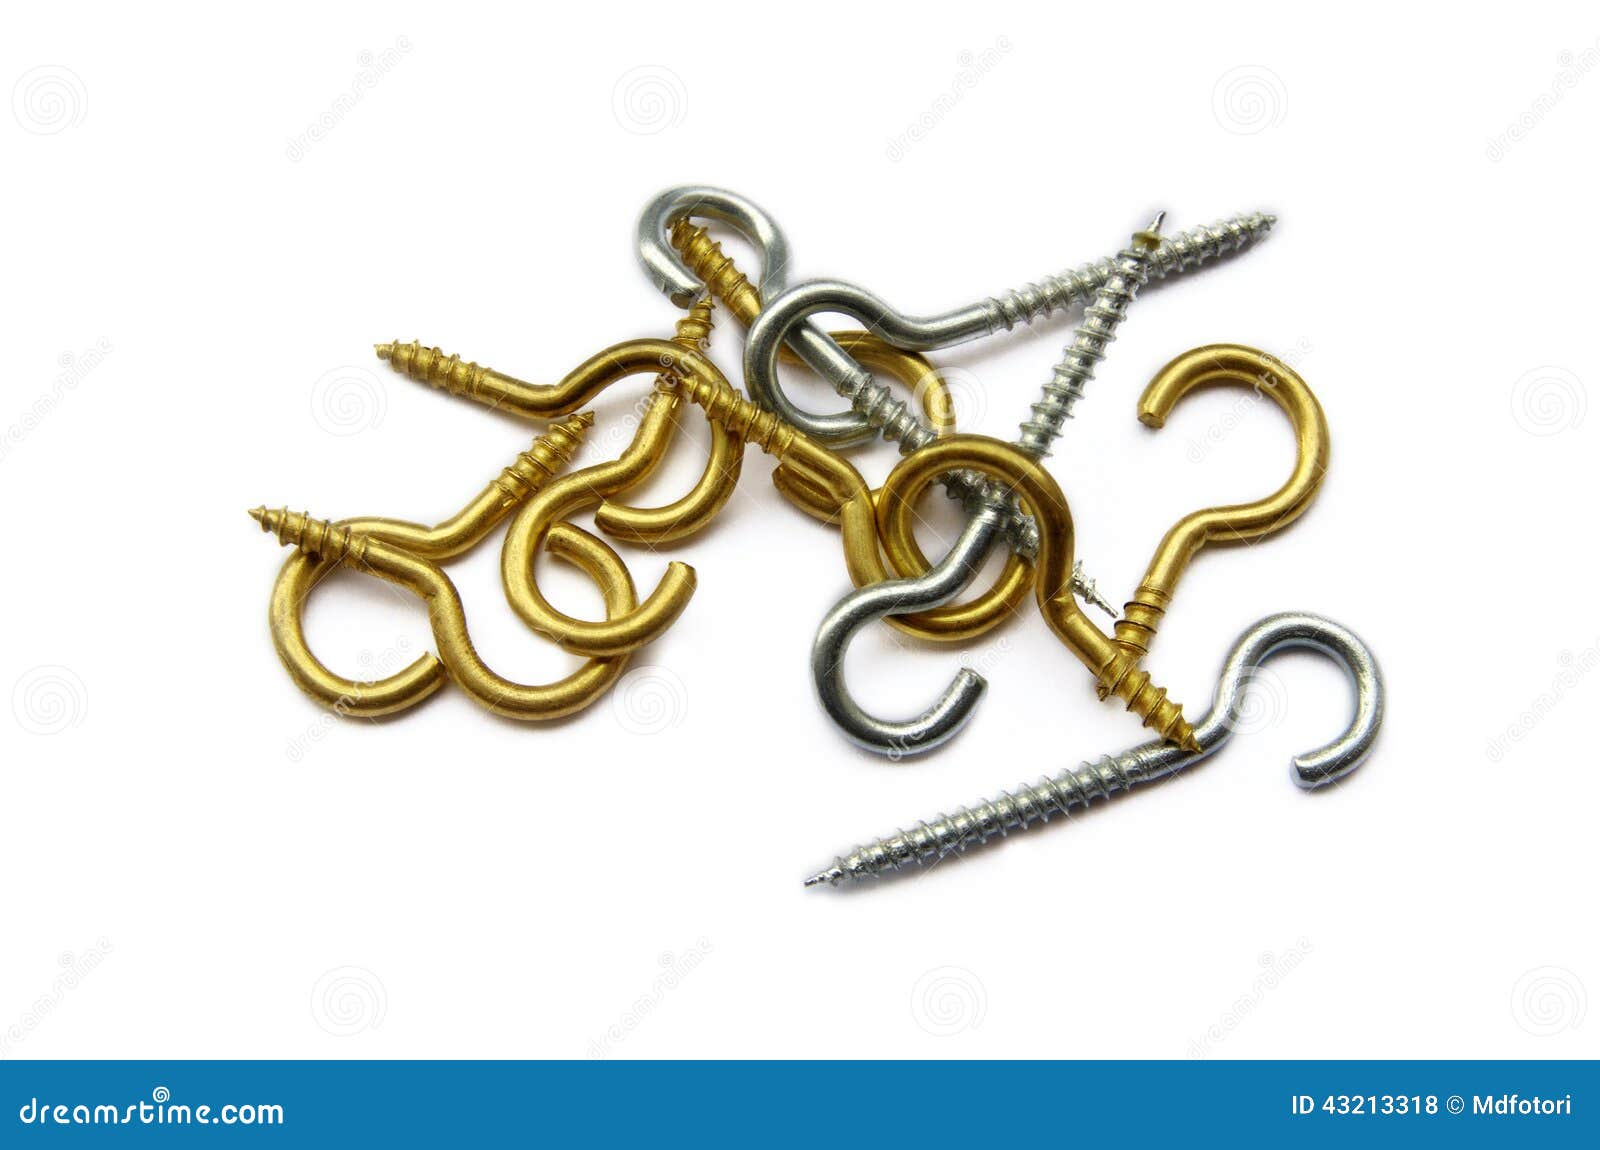 golden and silver wall hooks asorted